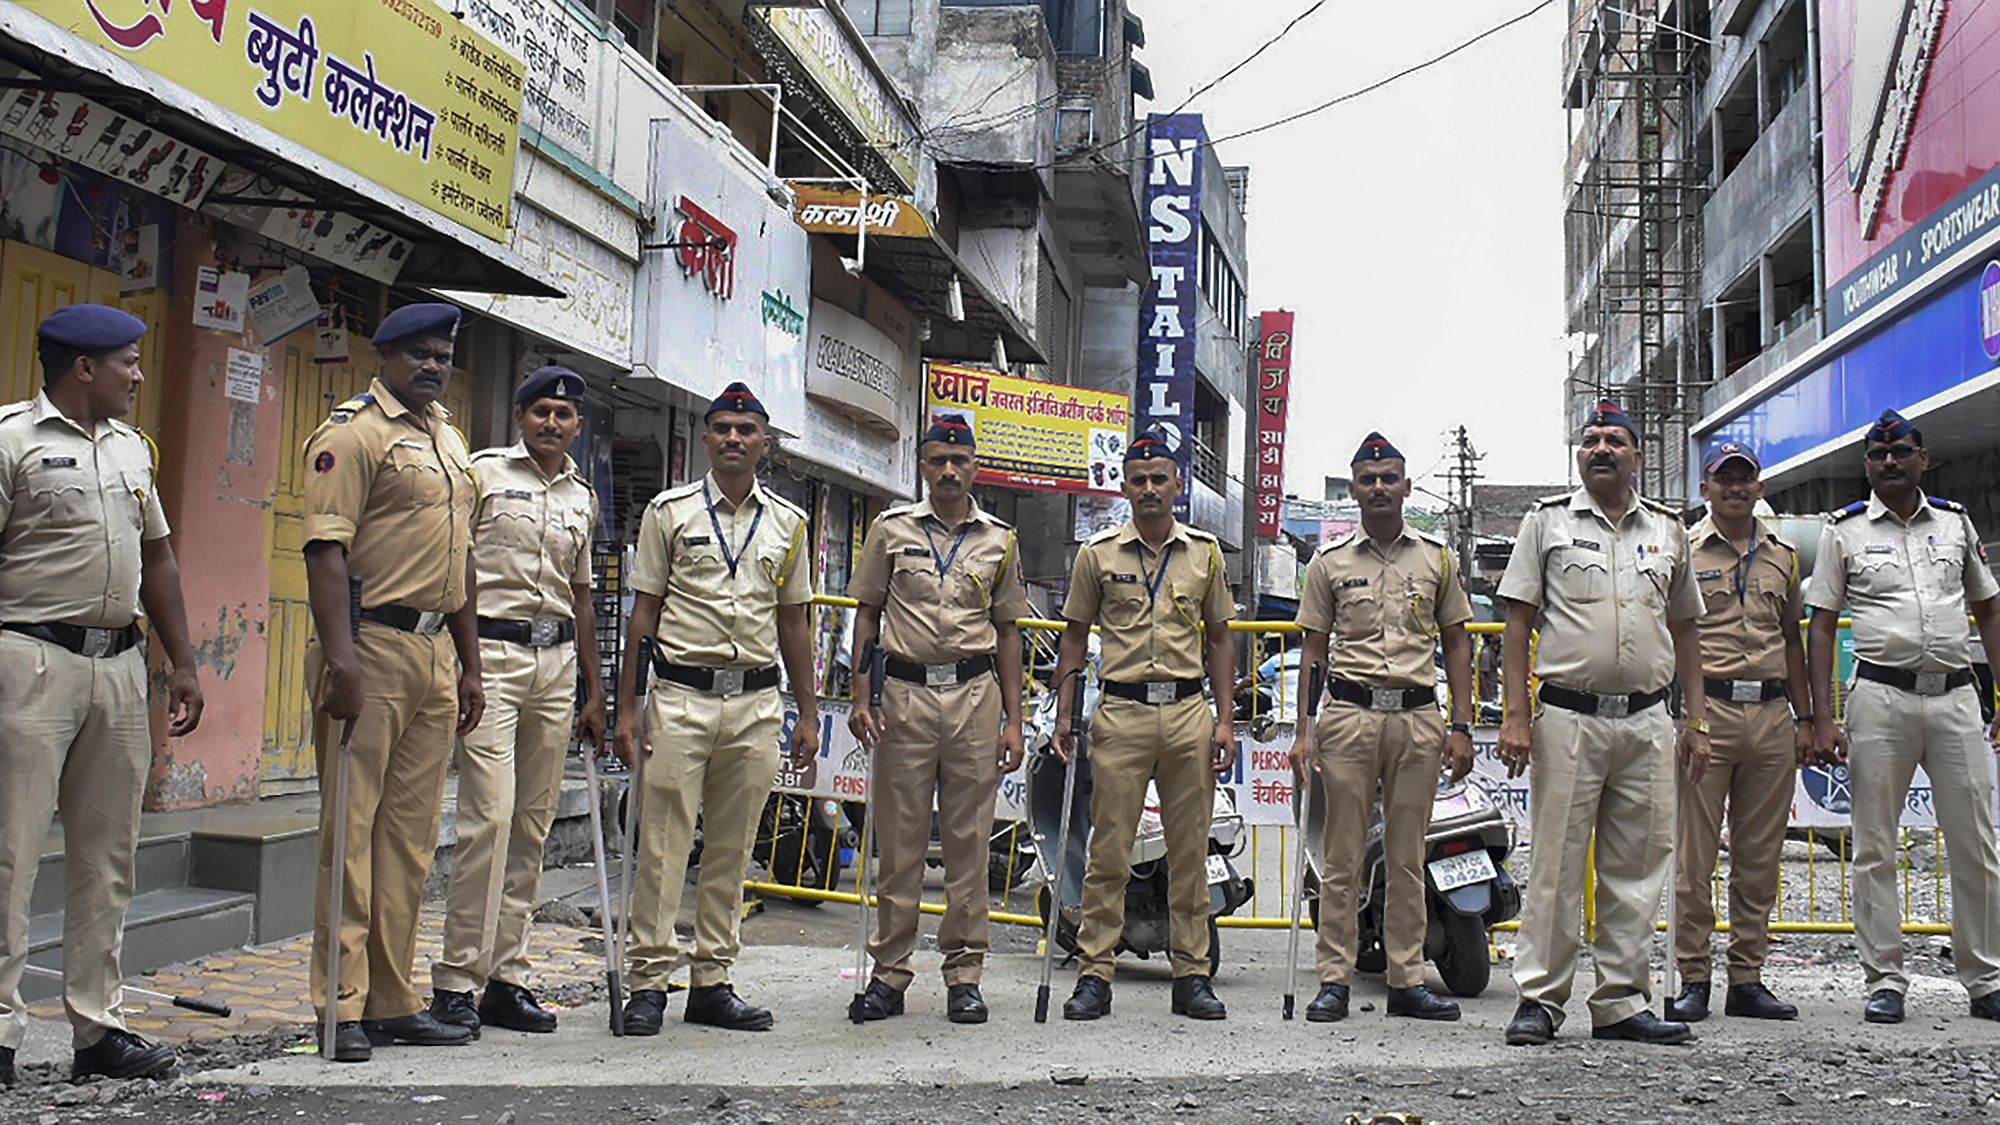 <div class="paragraphs"><p>Police personnel were deployed to maintain law and order after the killing of chemist Umesh Kolhe in Amravati. Image used for representational purposes only.</p></div>